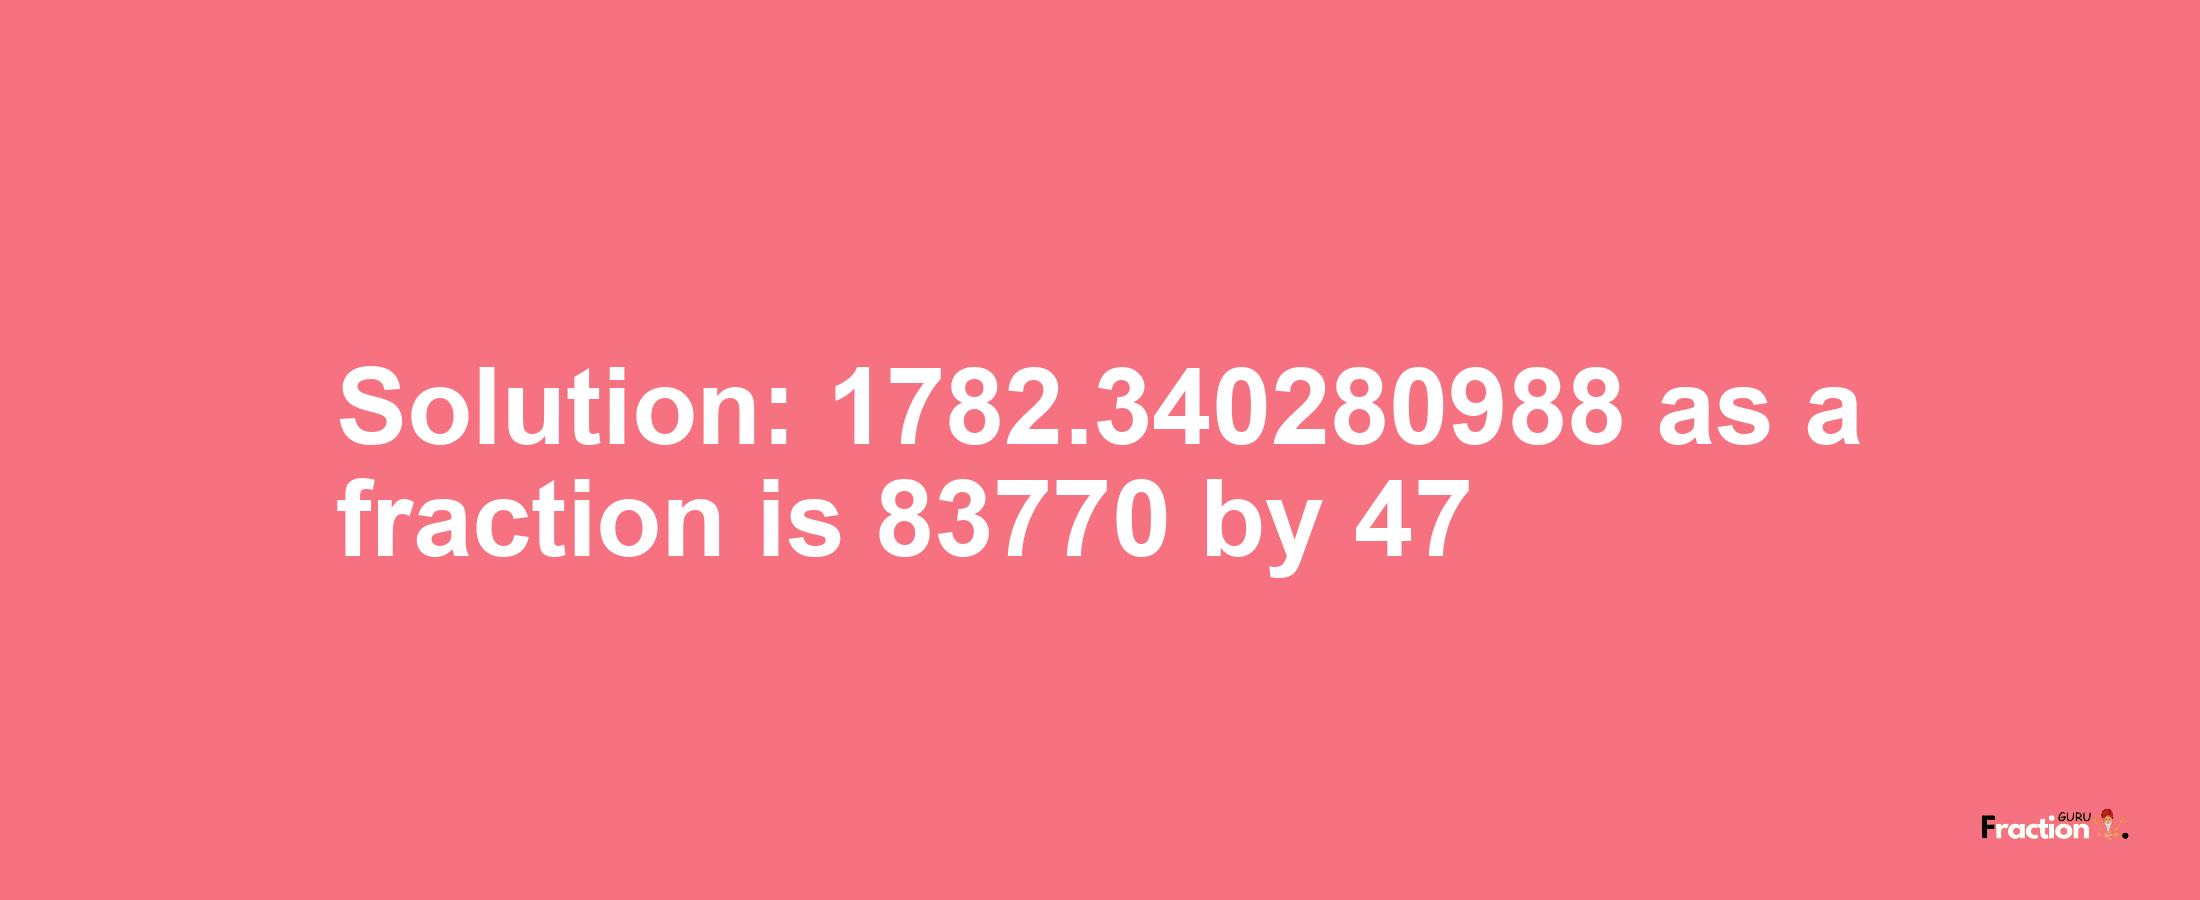 Solution:1782.340280988 as a fraction is 83770/47